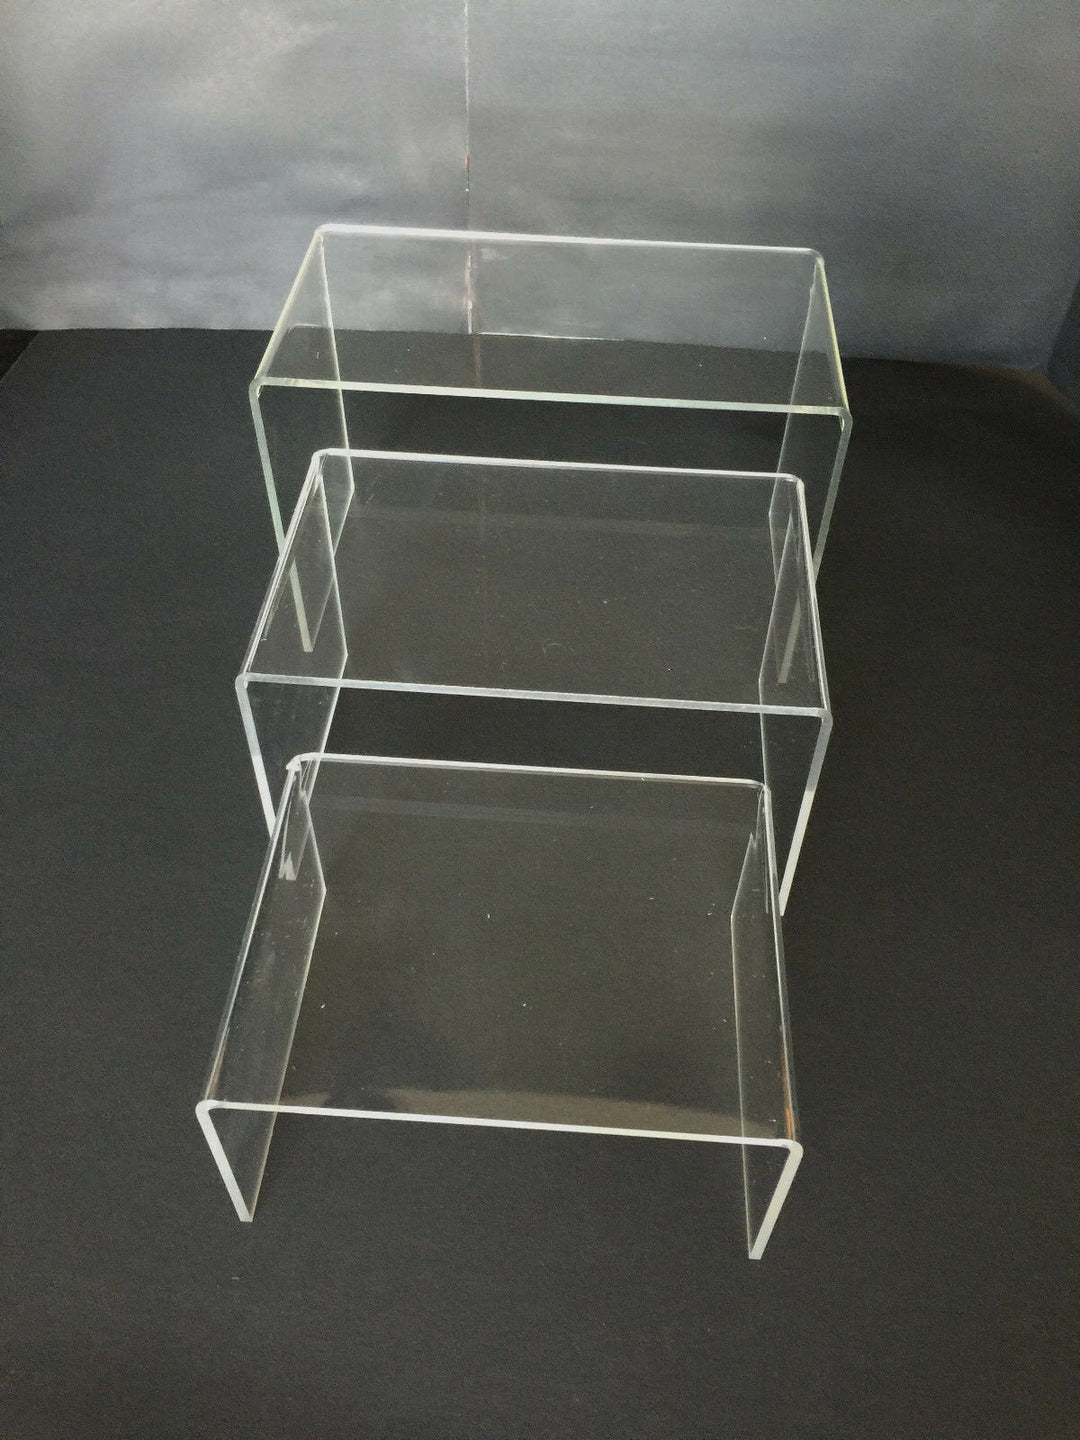 (3 Pack) Acrylic Plastic Clear Riser Display Stand 5 1/4", 6", 7 1/4 " Fixtures Jewelry